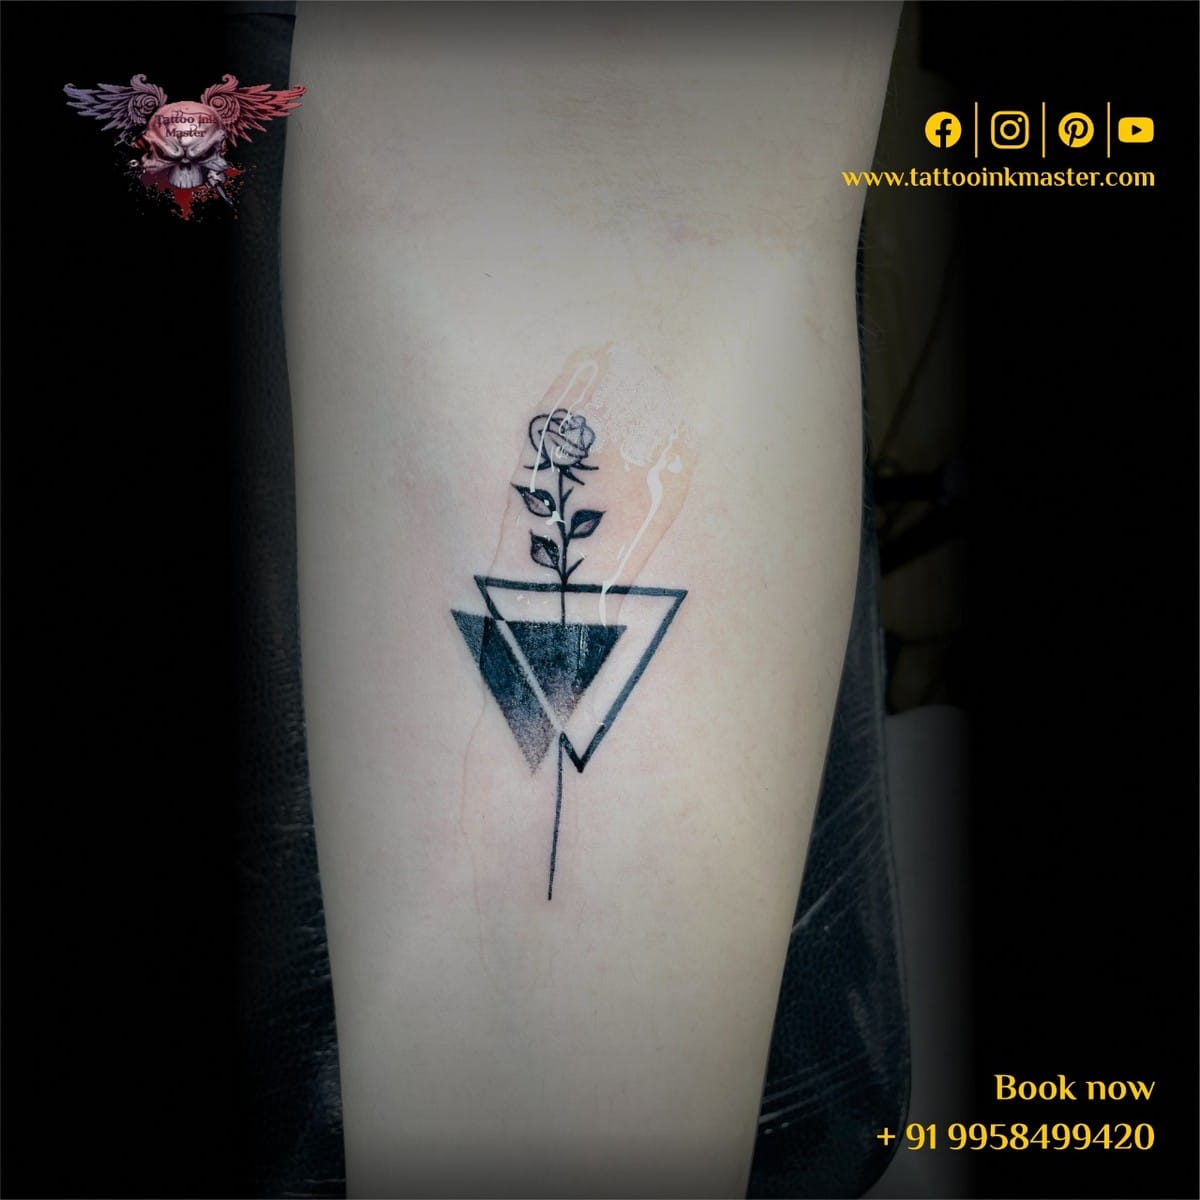 SK Ink Studio - lion logo on hand small tattoo for any queries  WhatsApp:9914505147 for appointment email me : sktattoo7@yahoo.com  #followme : @i.shubham #followme: @sk_ink_studio for collaboration or  commission work contact me. . . . . . . . . . . . . #